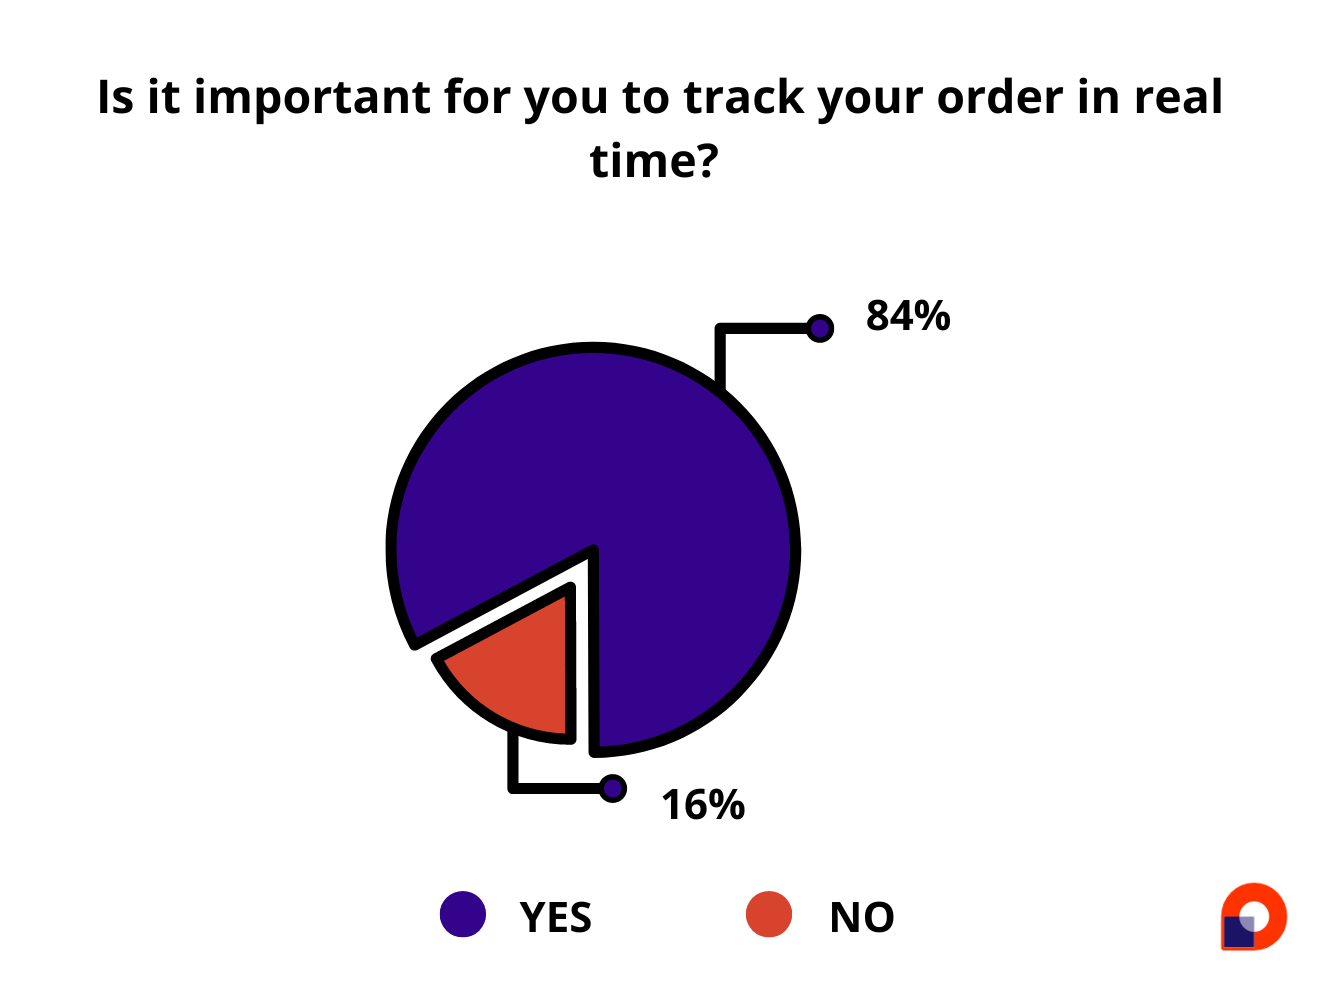 Importance of real time order tracking survey 